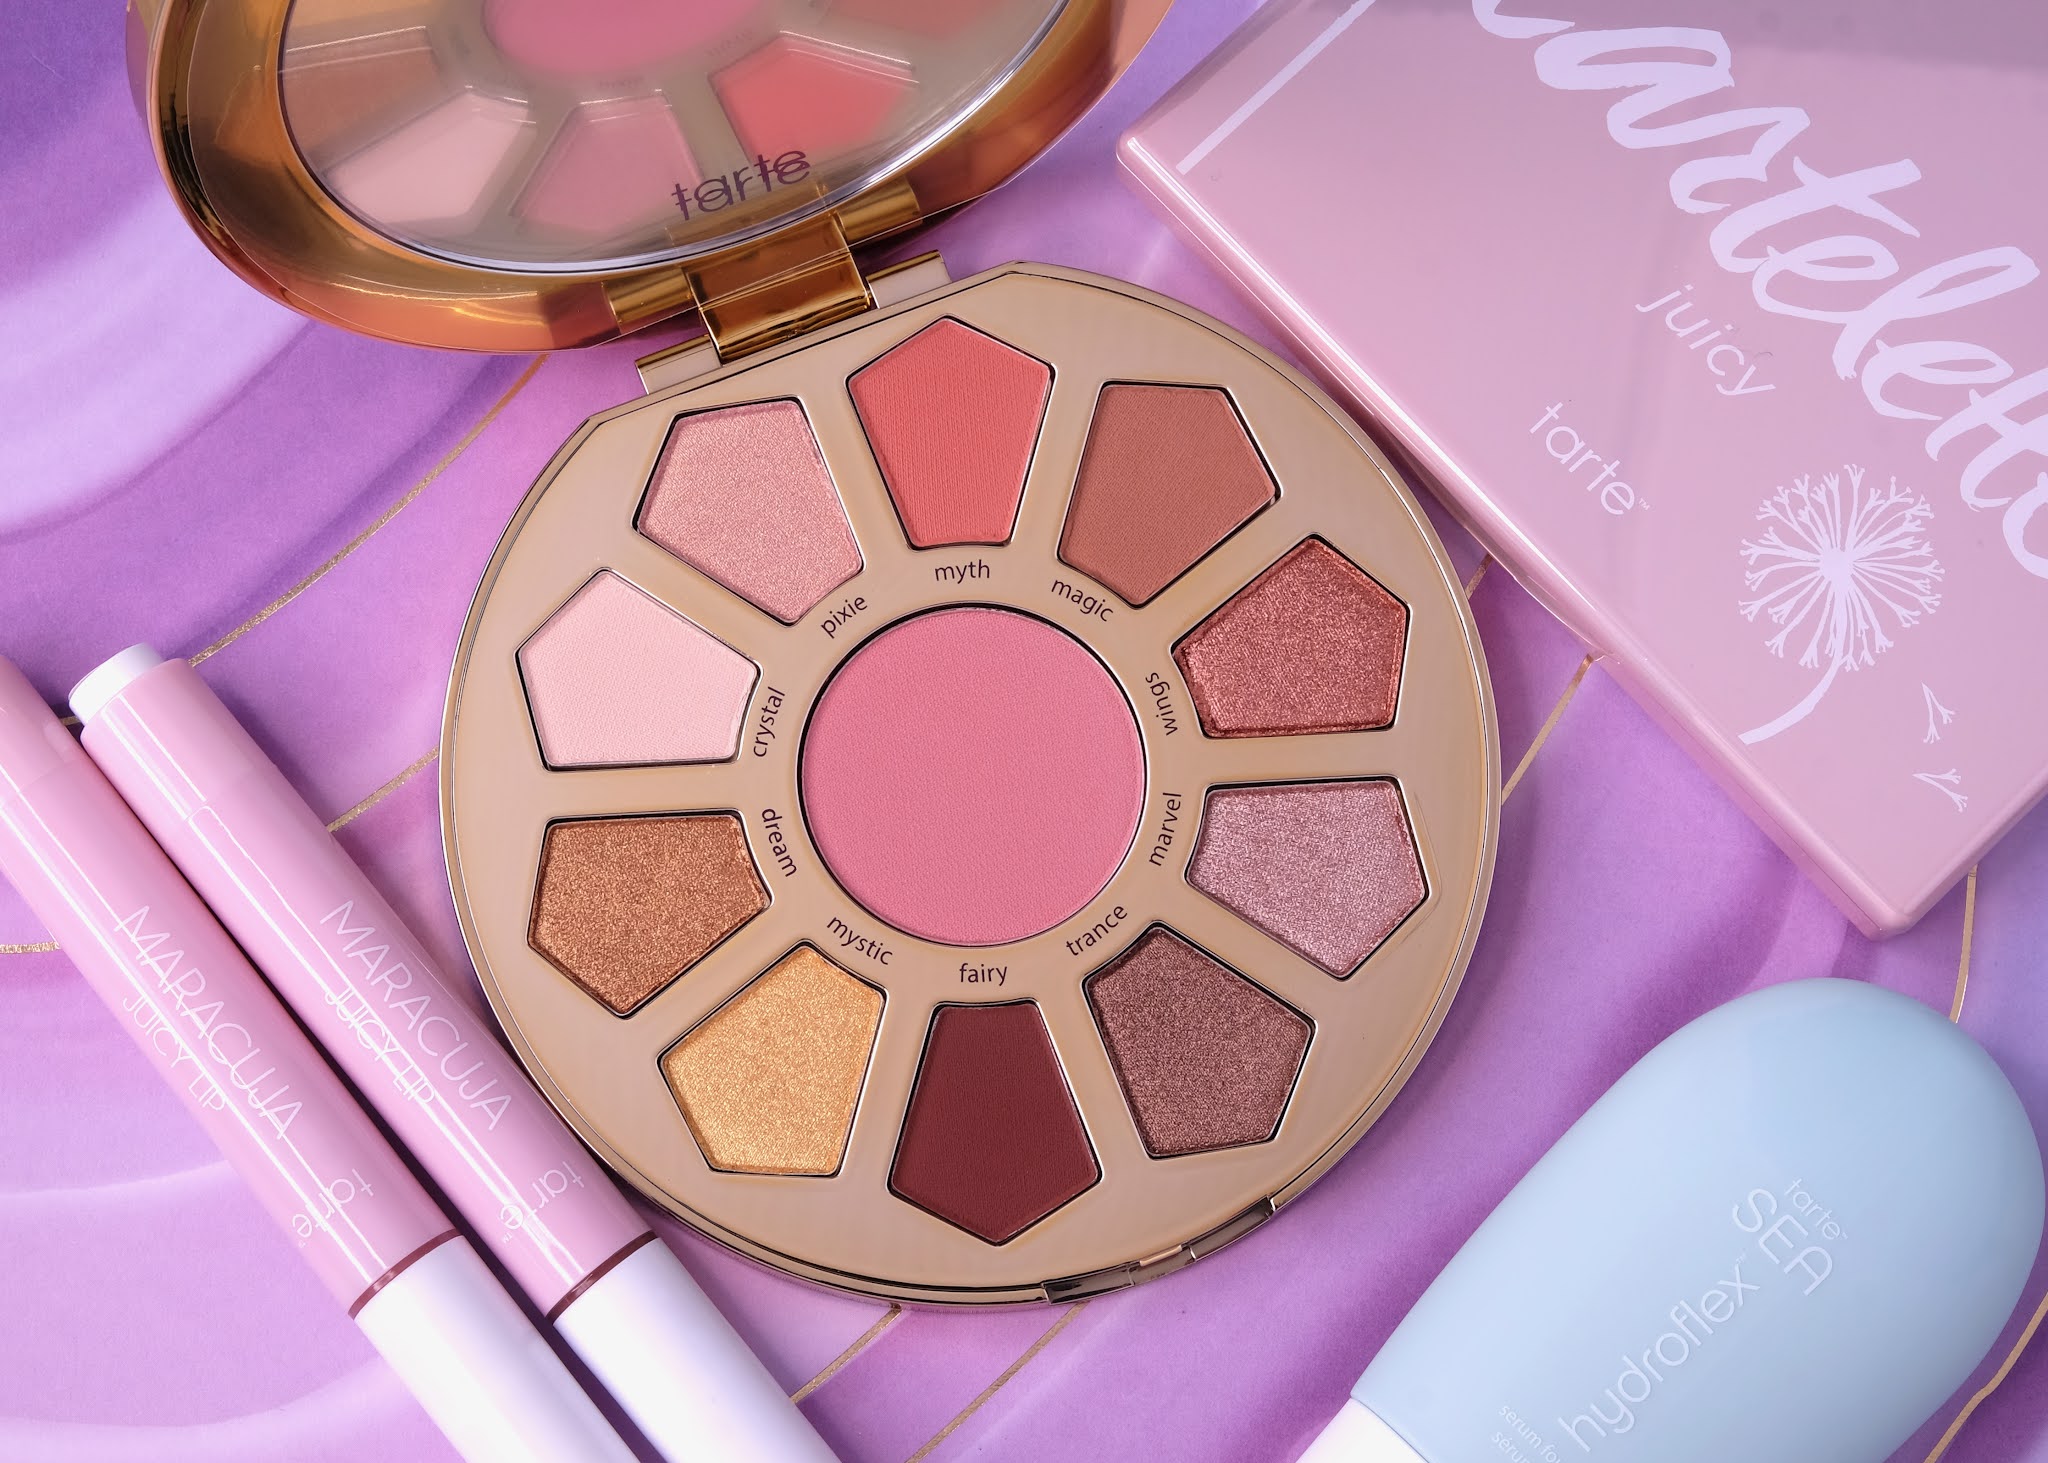 Tarte | Sugar Rush™ Dream On Eye & Cheek Palette: Review and Swatches